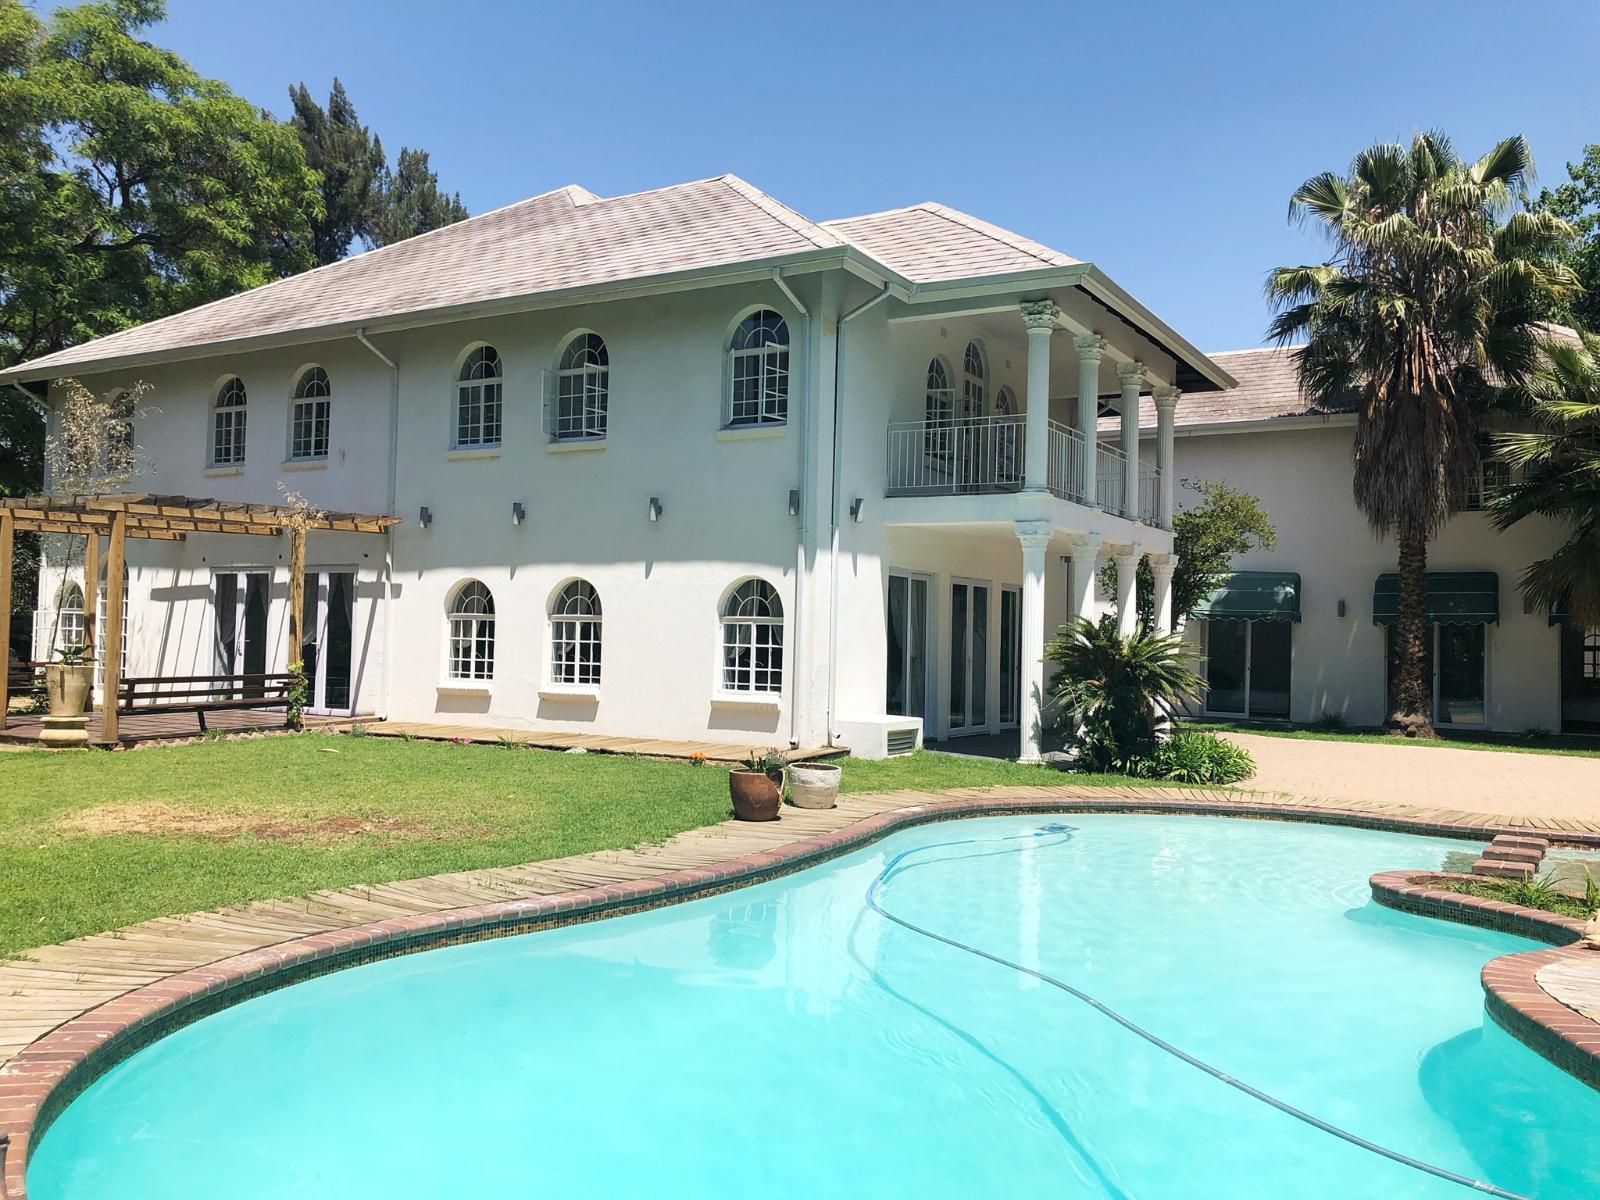 Lotus Guest House Morningside Manor Johannesburg Gauteng South Africa House, Building, Architecture, Palm Tree, Plant, Nature, Wood, Swimming Pool